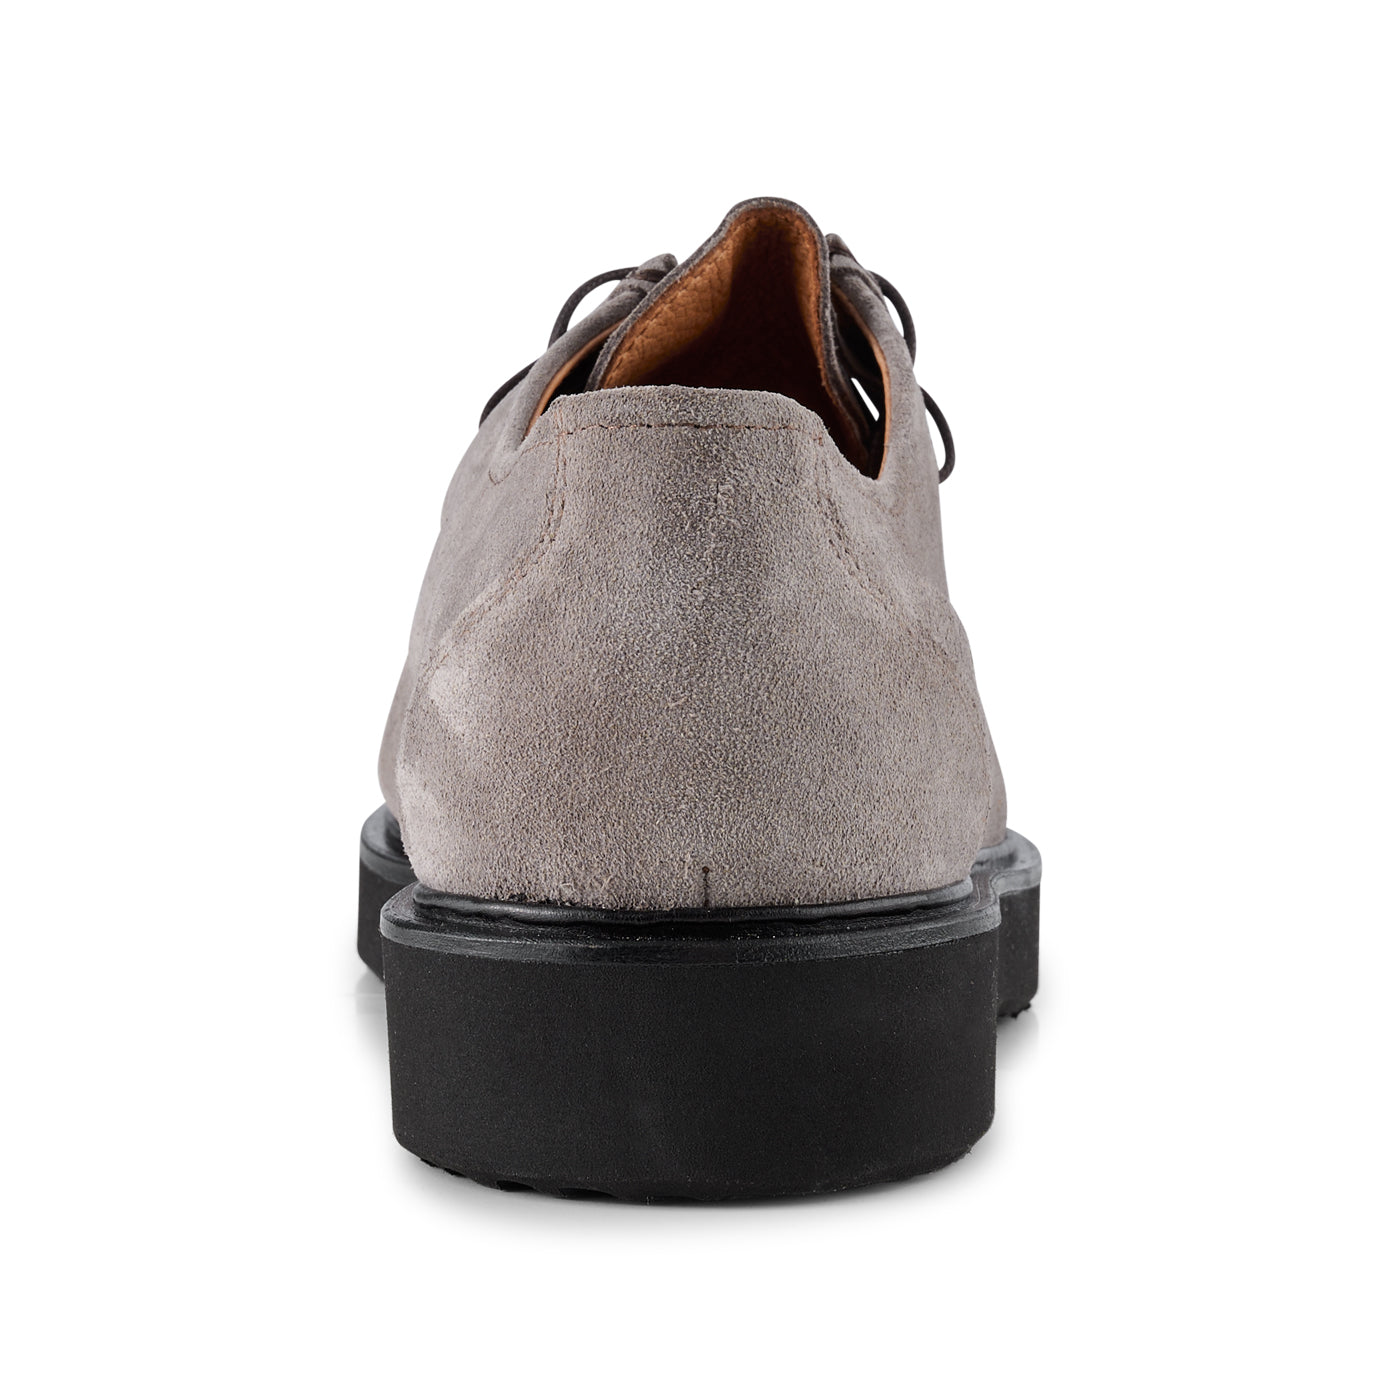 SHOE THE BEAR MENS Cosmos apron shoe suede Shoes 160 TAUPE